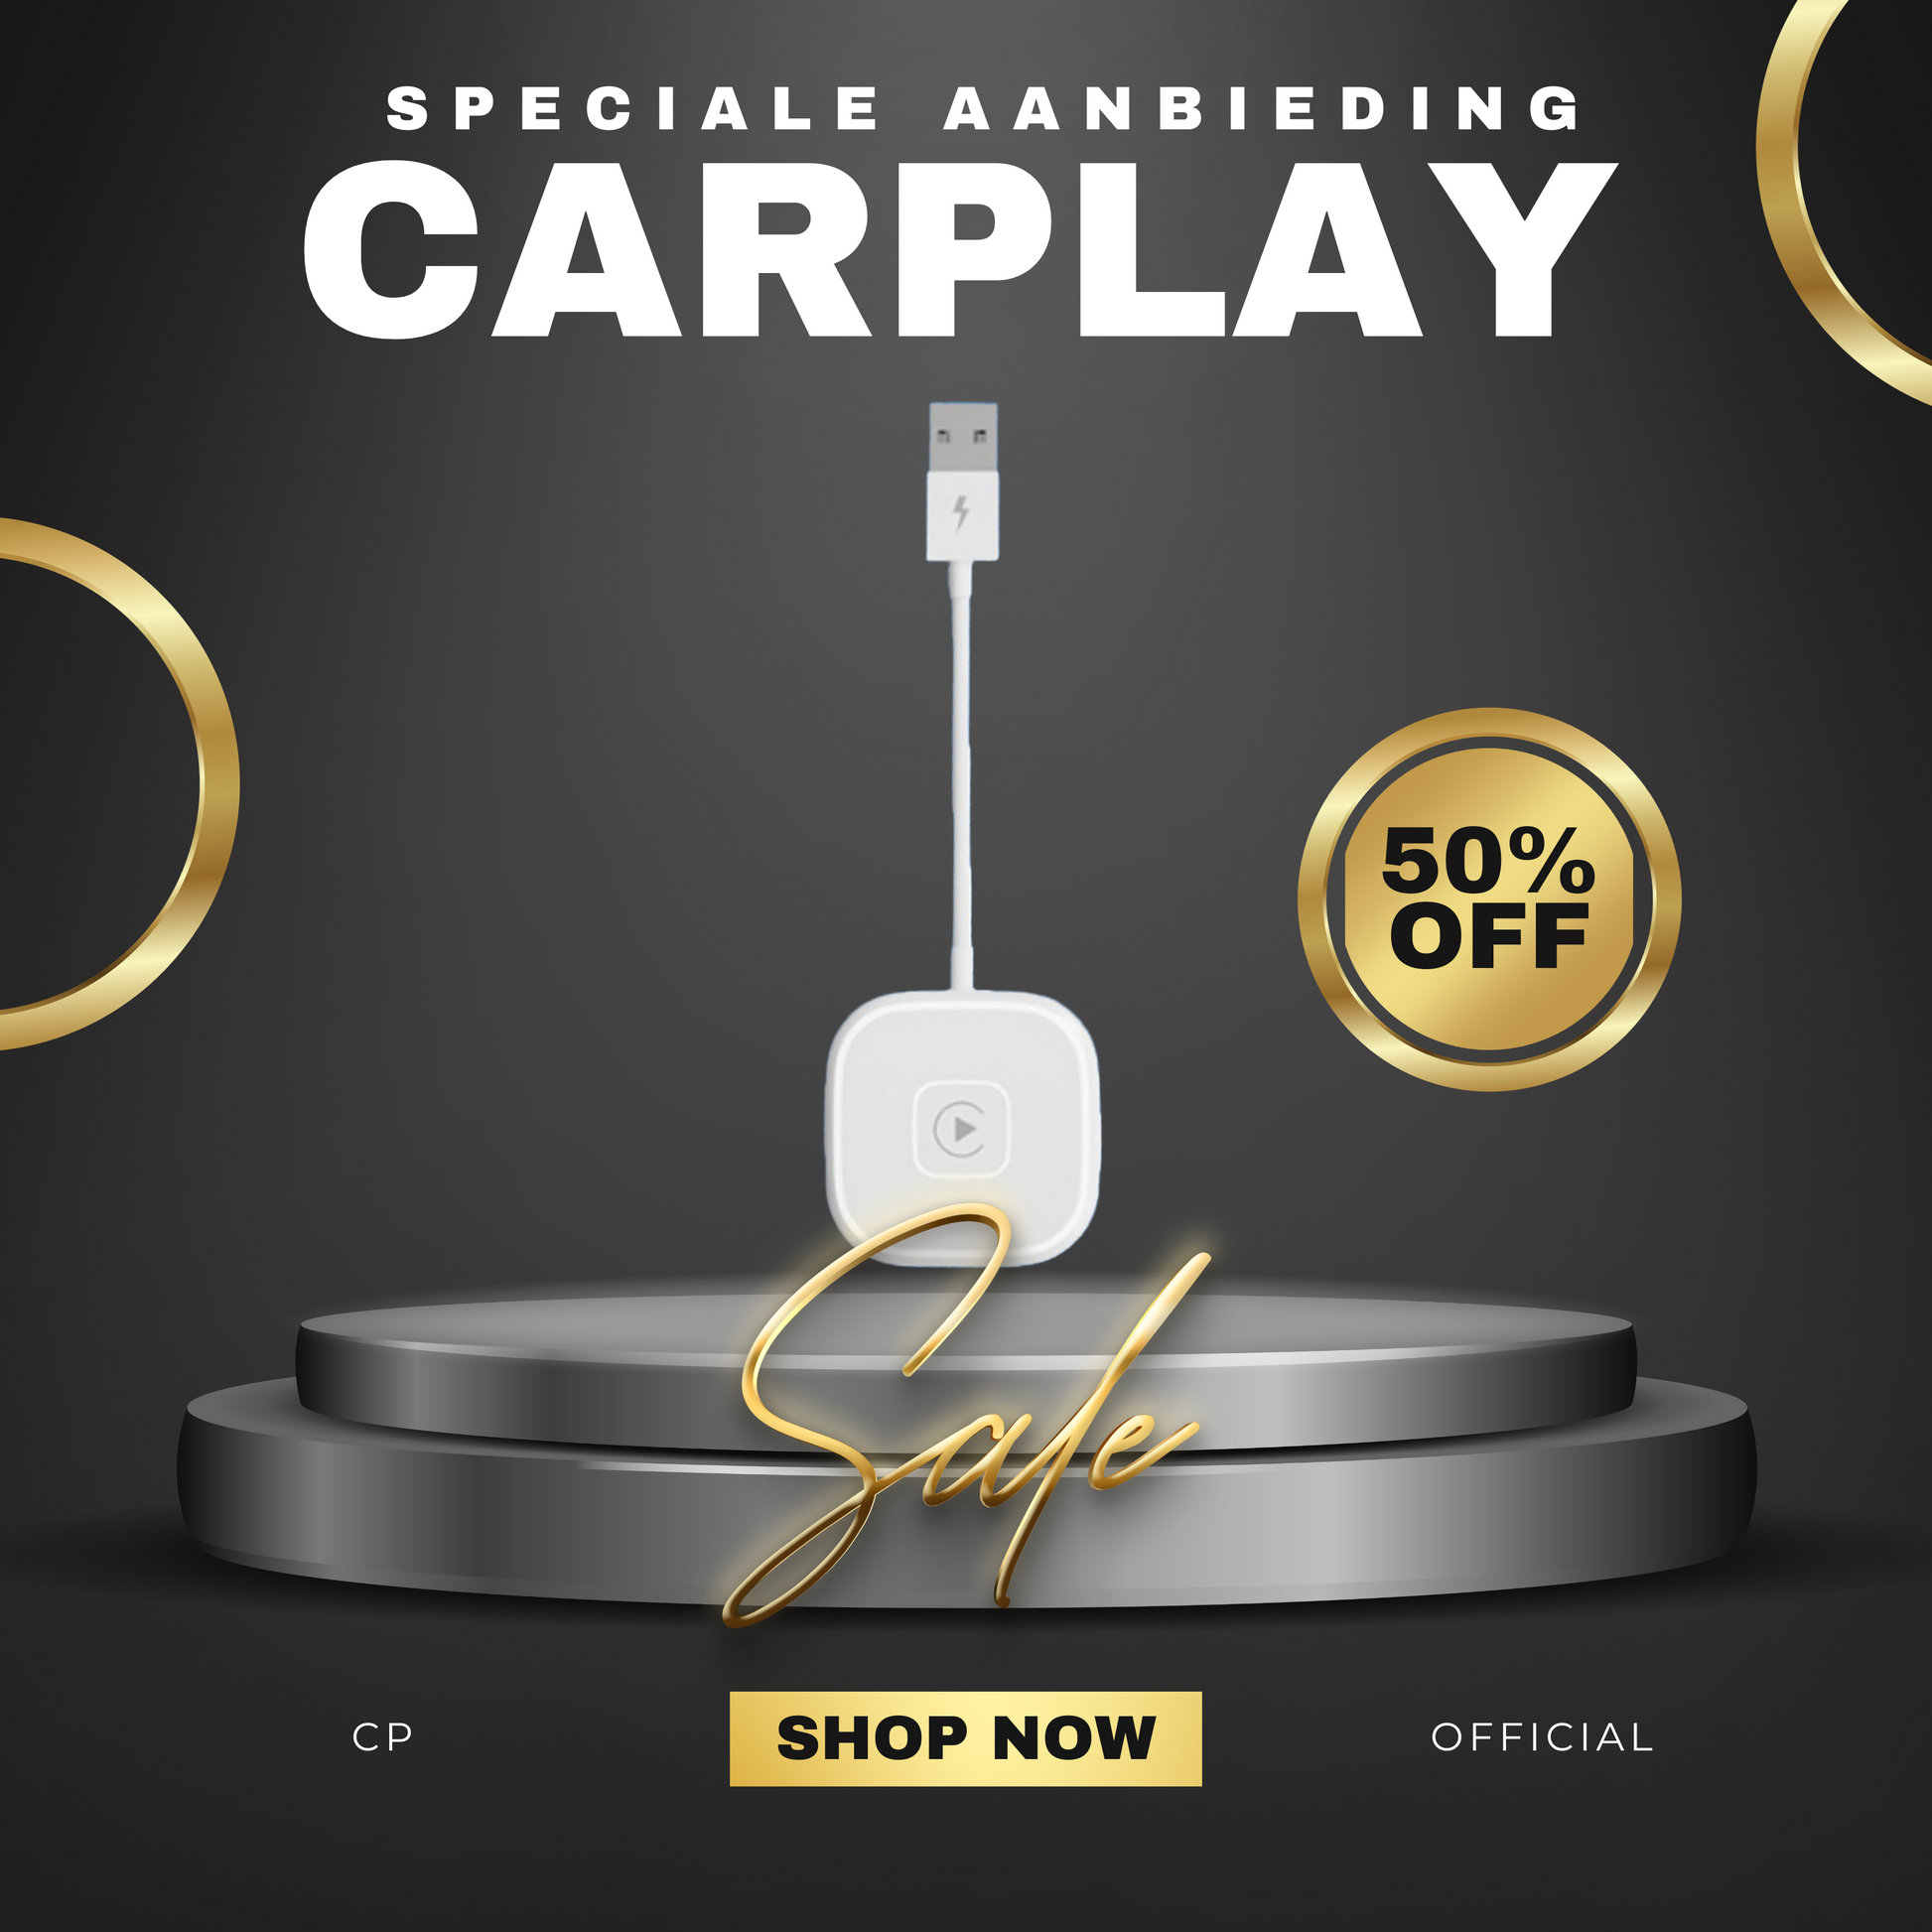 CarPlay special offer: Get exclusive discounts on CarPlay compatible vehicles and accessories. Limited time only!